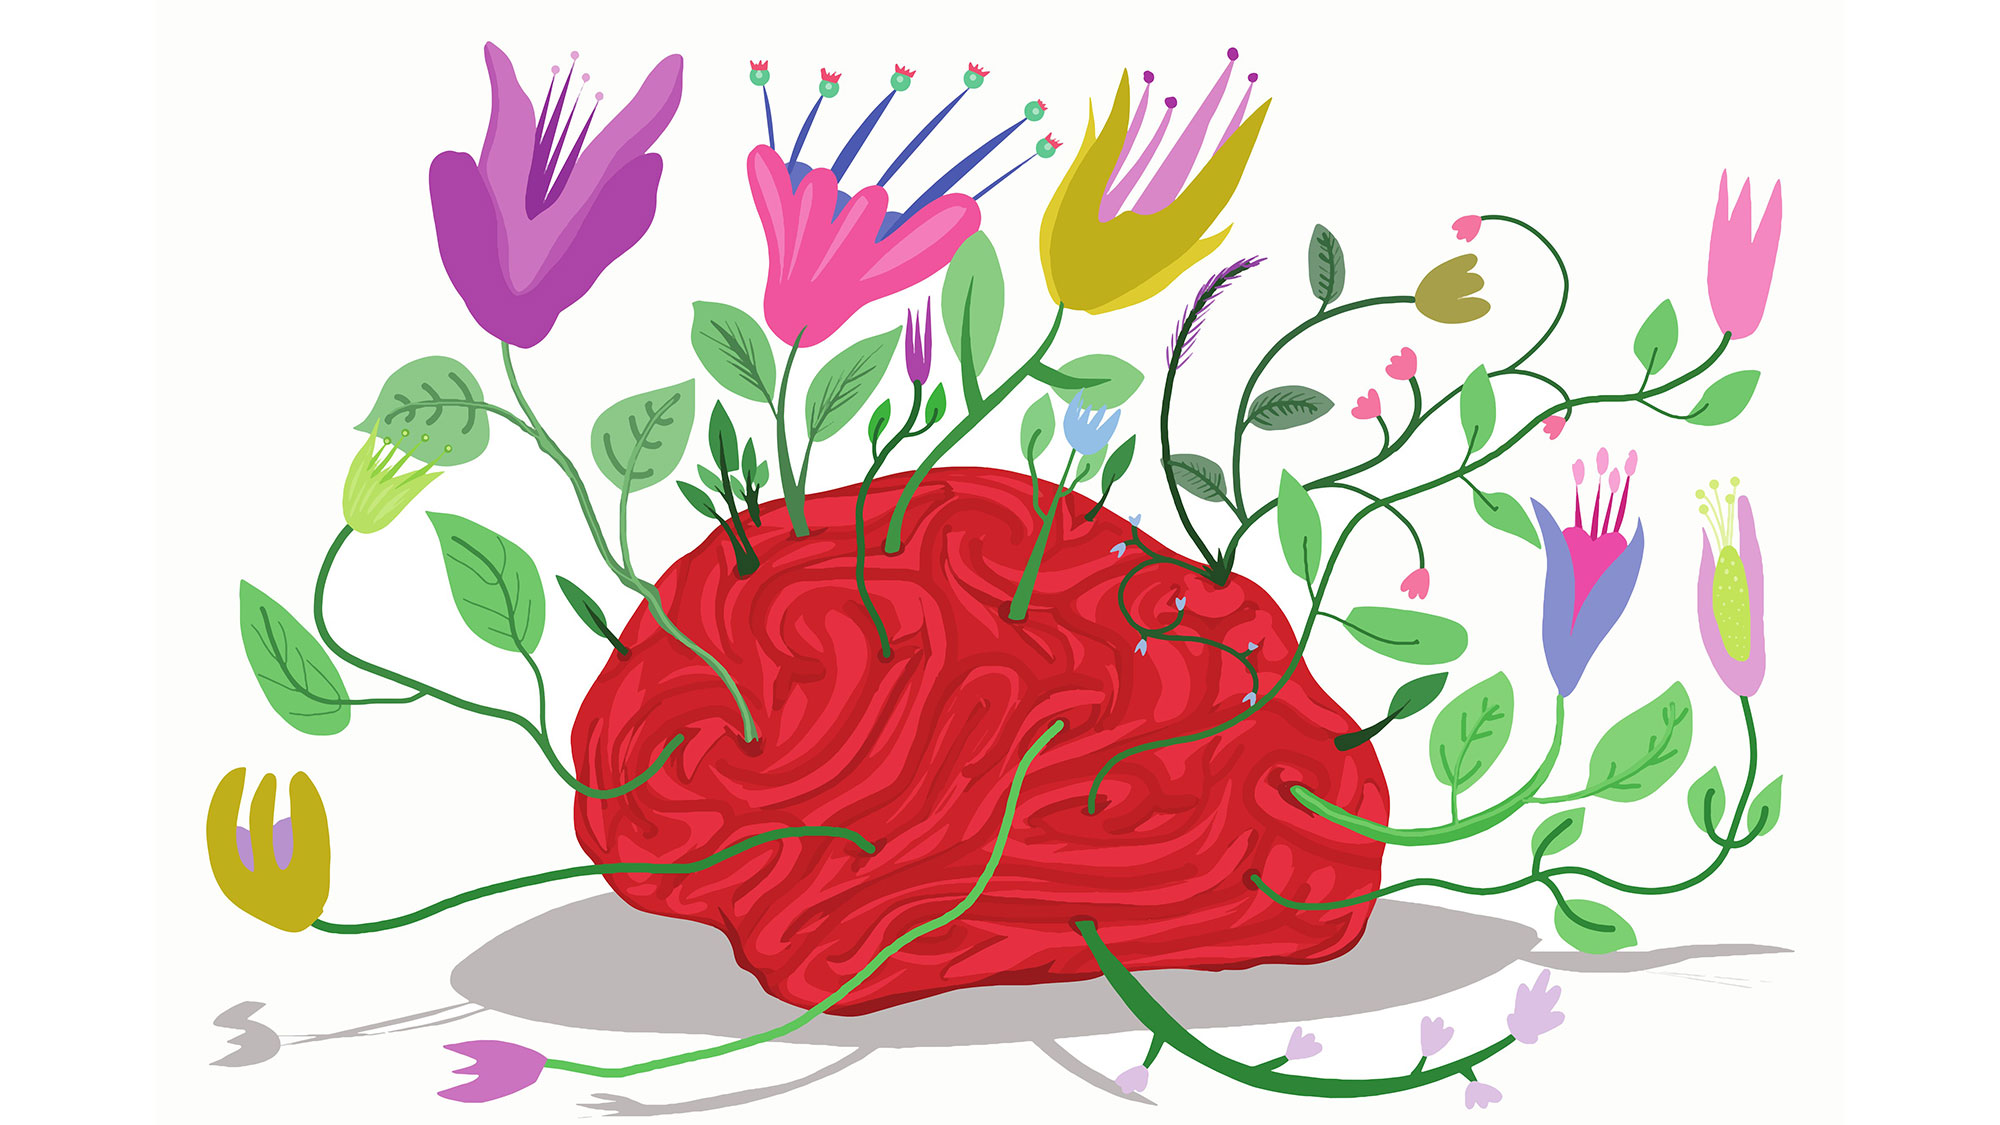 An illustration of a brain with flowers growing out of it.